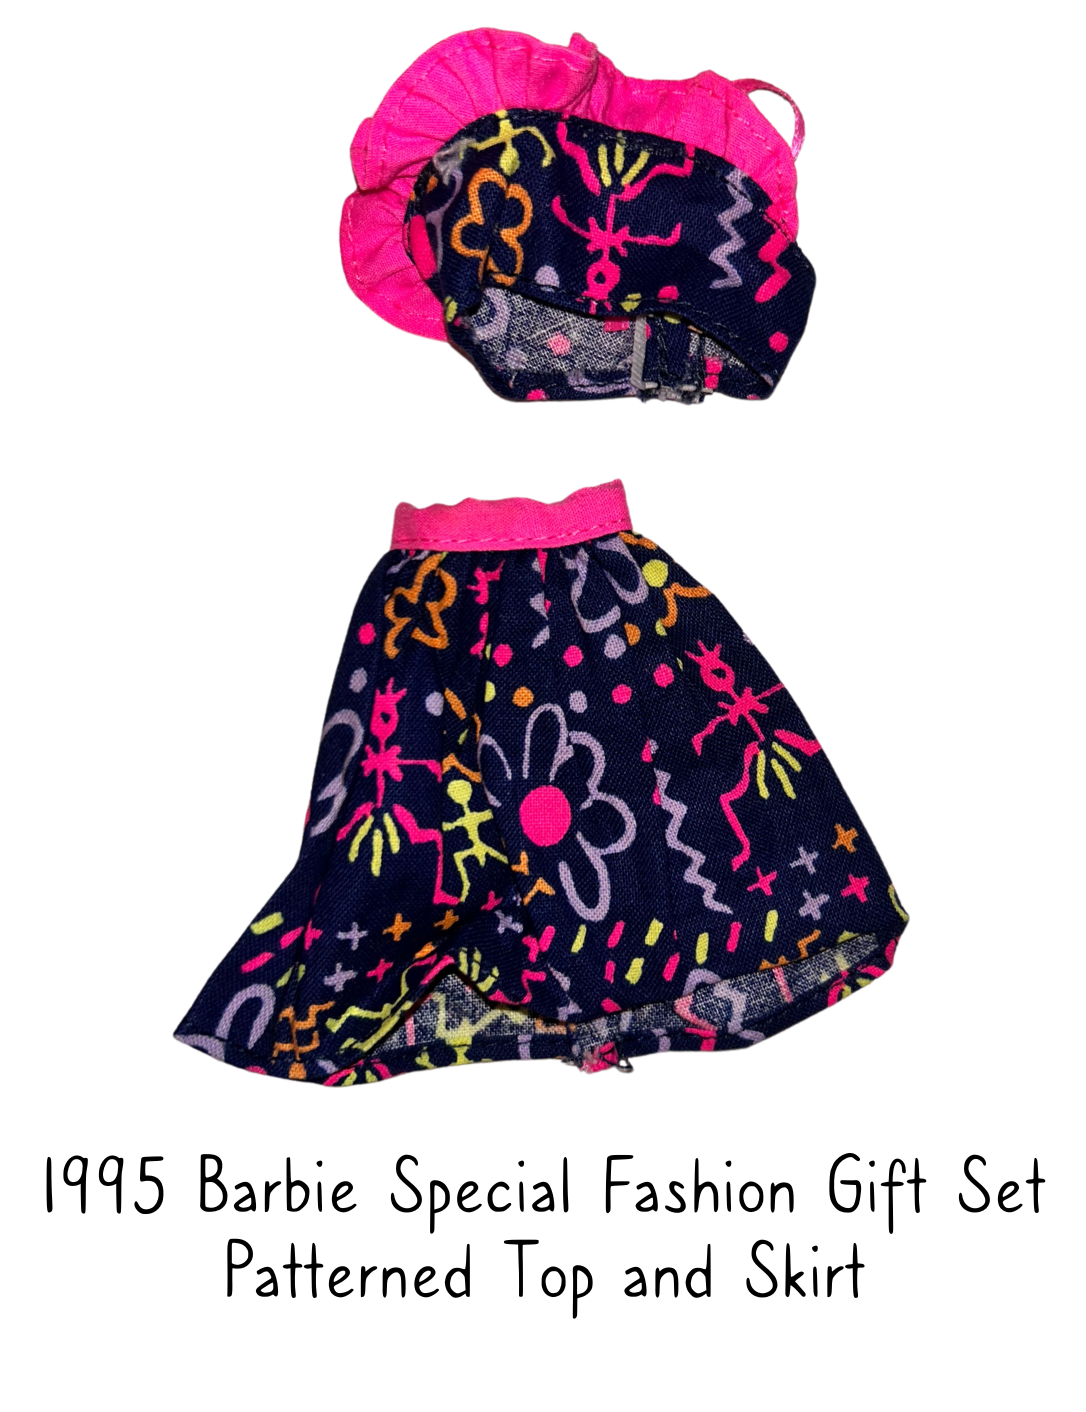 1995 Barbie Special Fashion Gift Set Patterned Top and Skirt